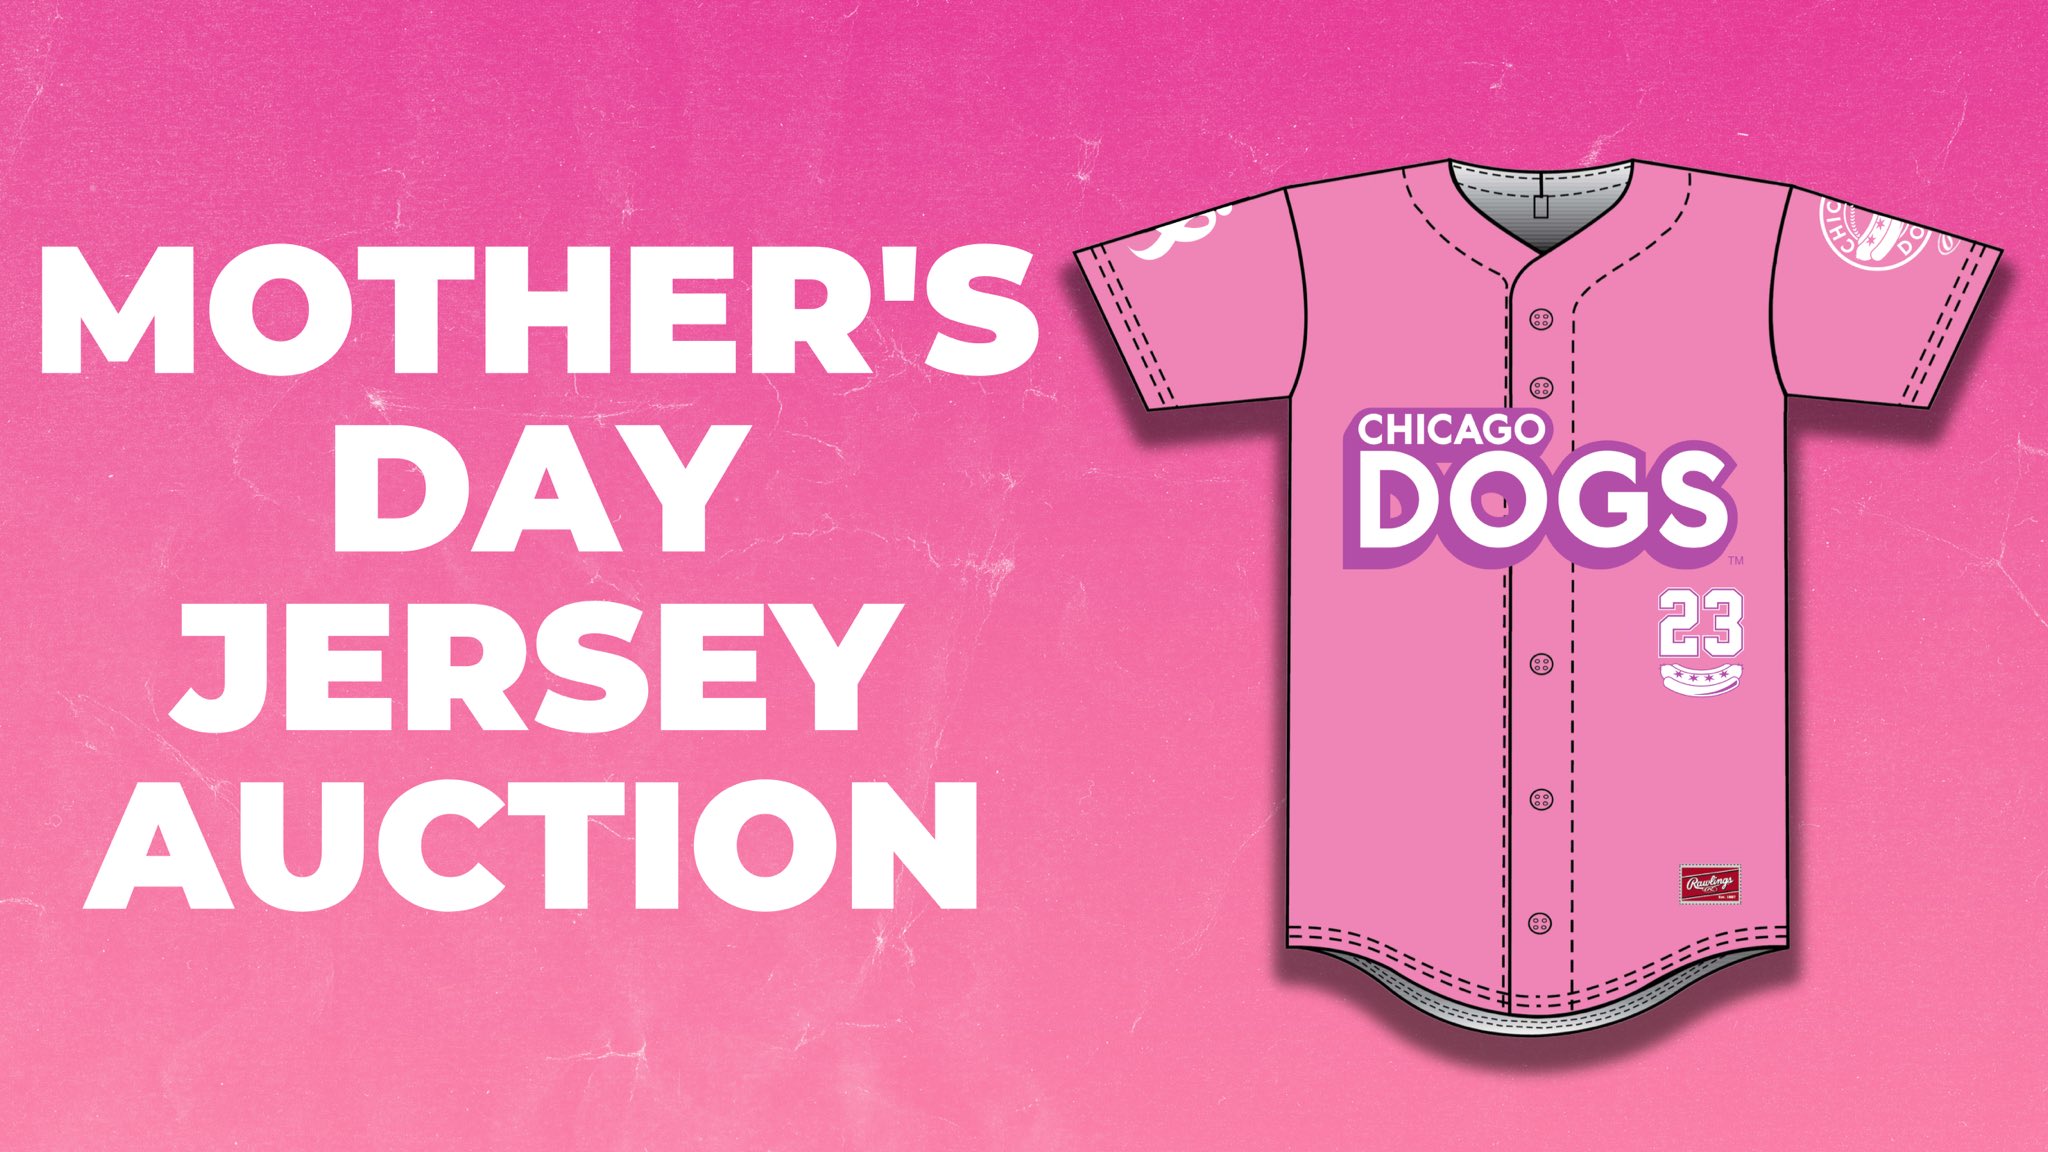 Chicago Dogs on X: Happy Mother's Day! Don't miss out on your chance to  get one of our commemorative Mother's Day jerseys benefiting Susan G.  Komen. 🩷🌷 Auction opens at 1:45 pm